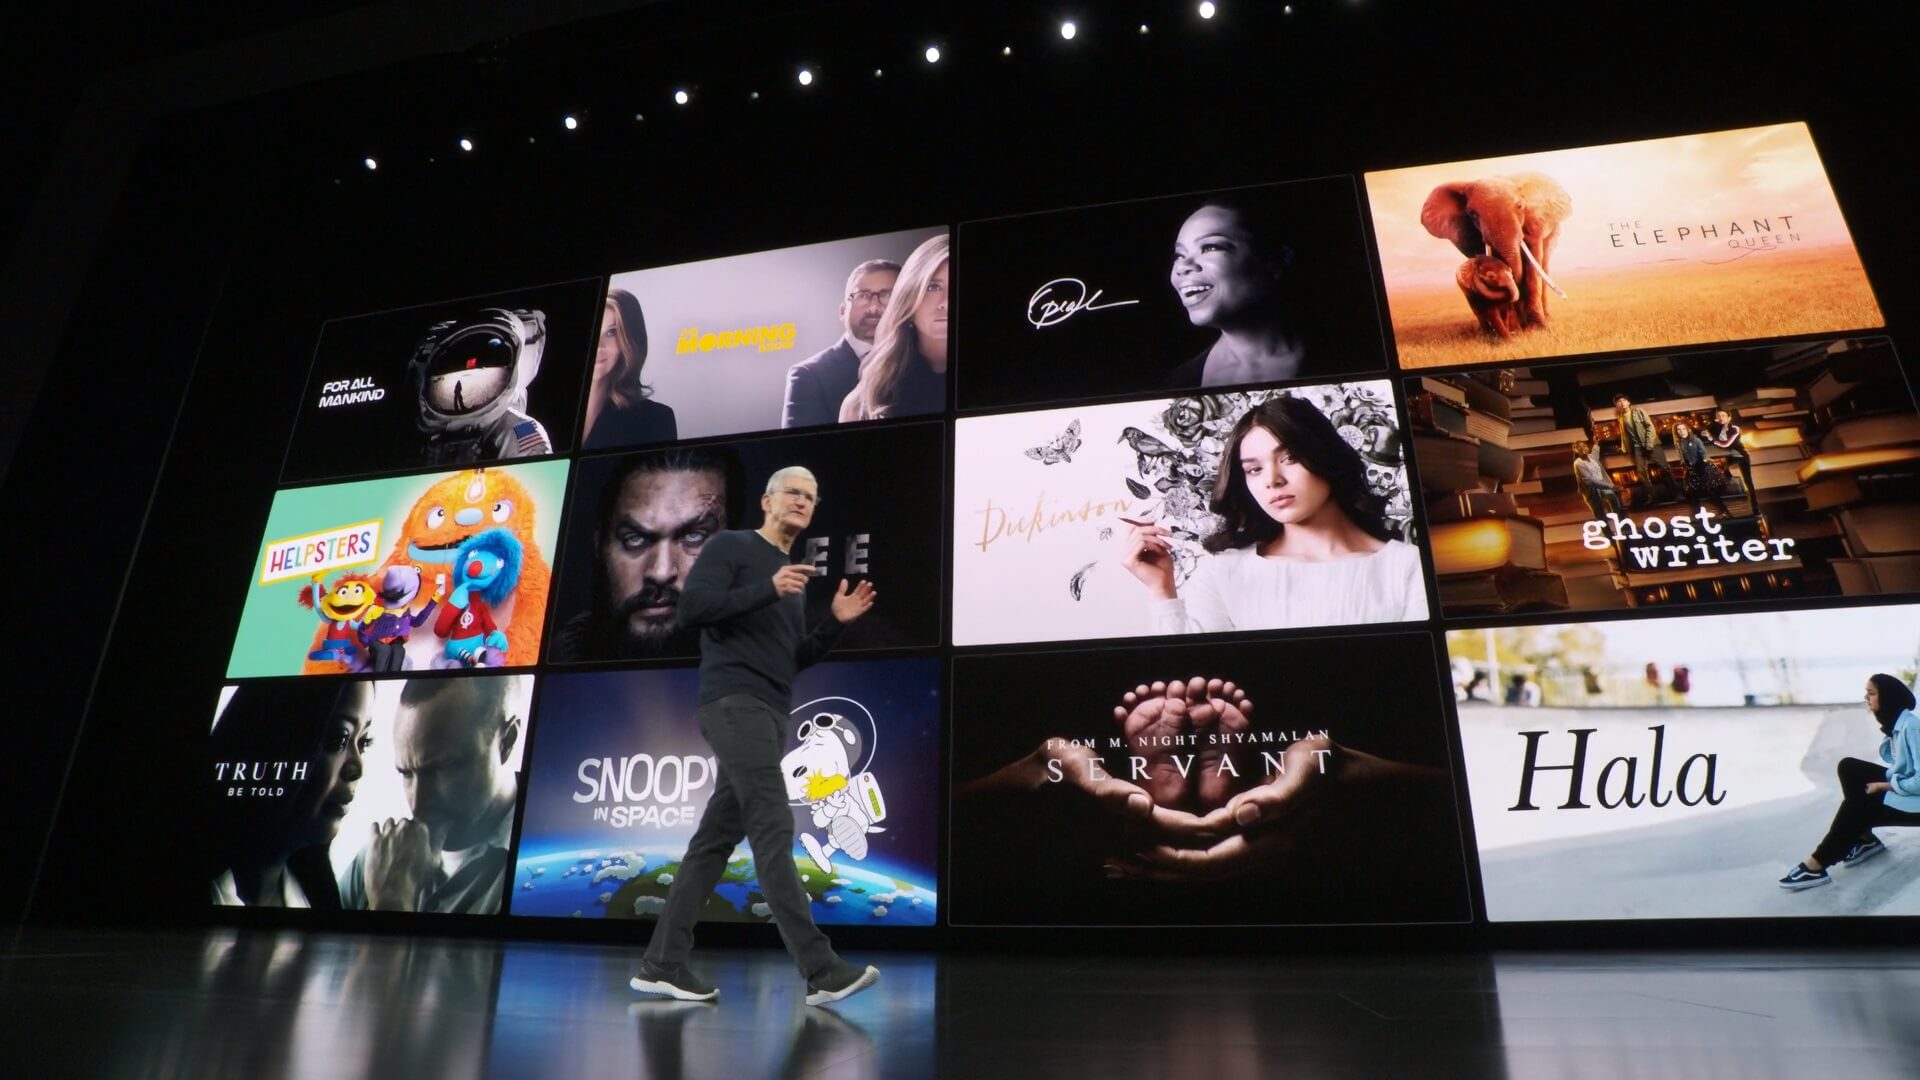 Apple looking to undercut Netflix in India with a $1.40 per month subscription